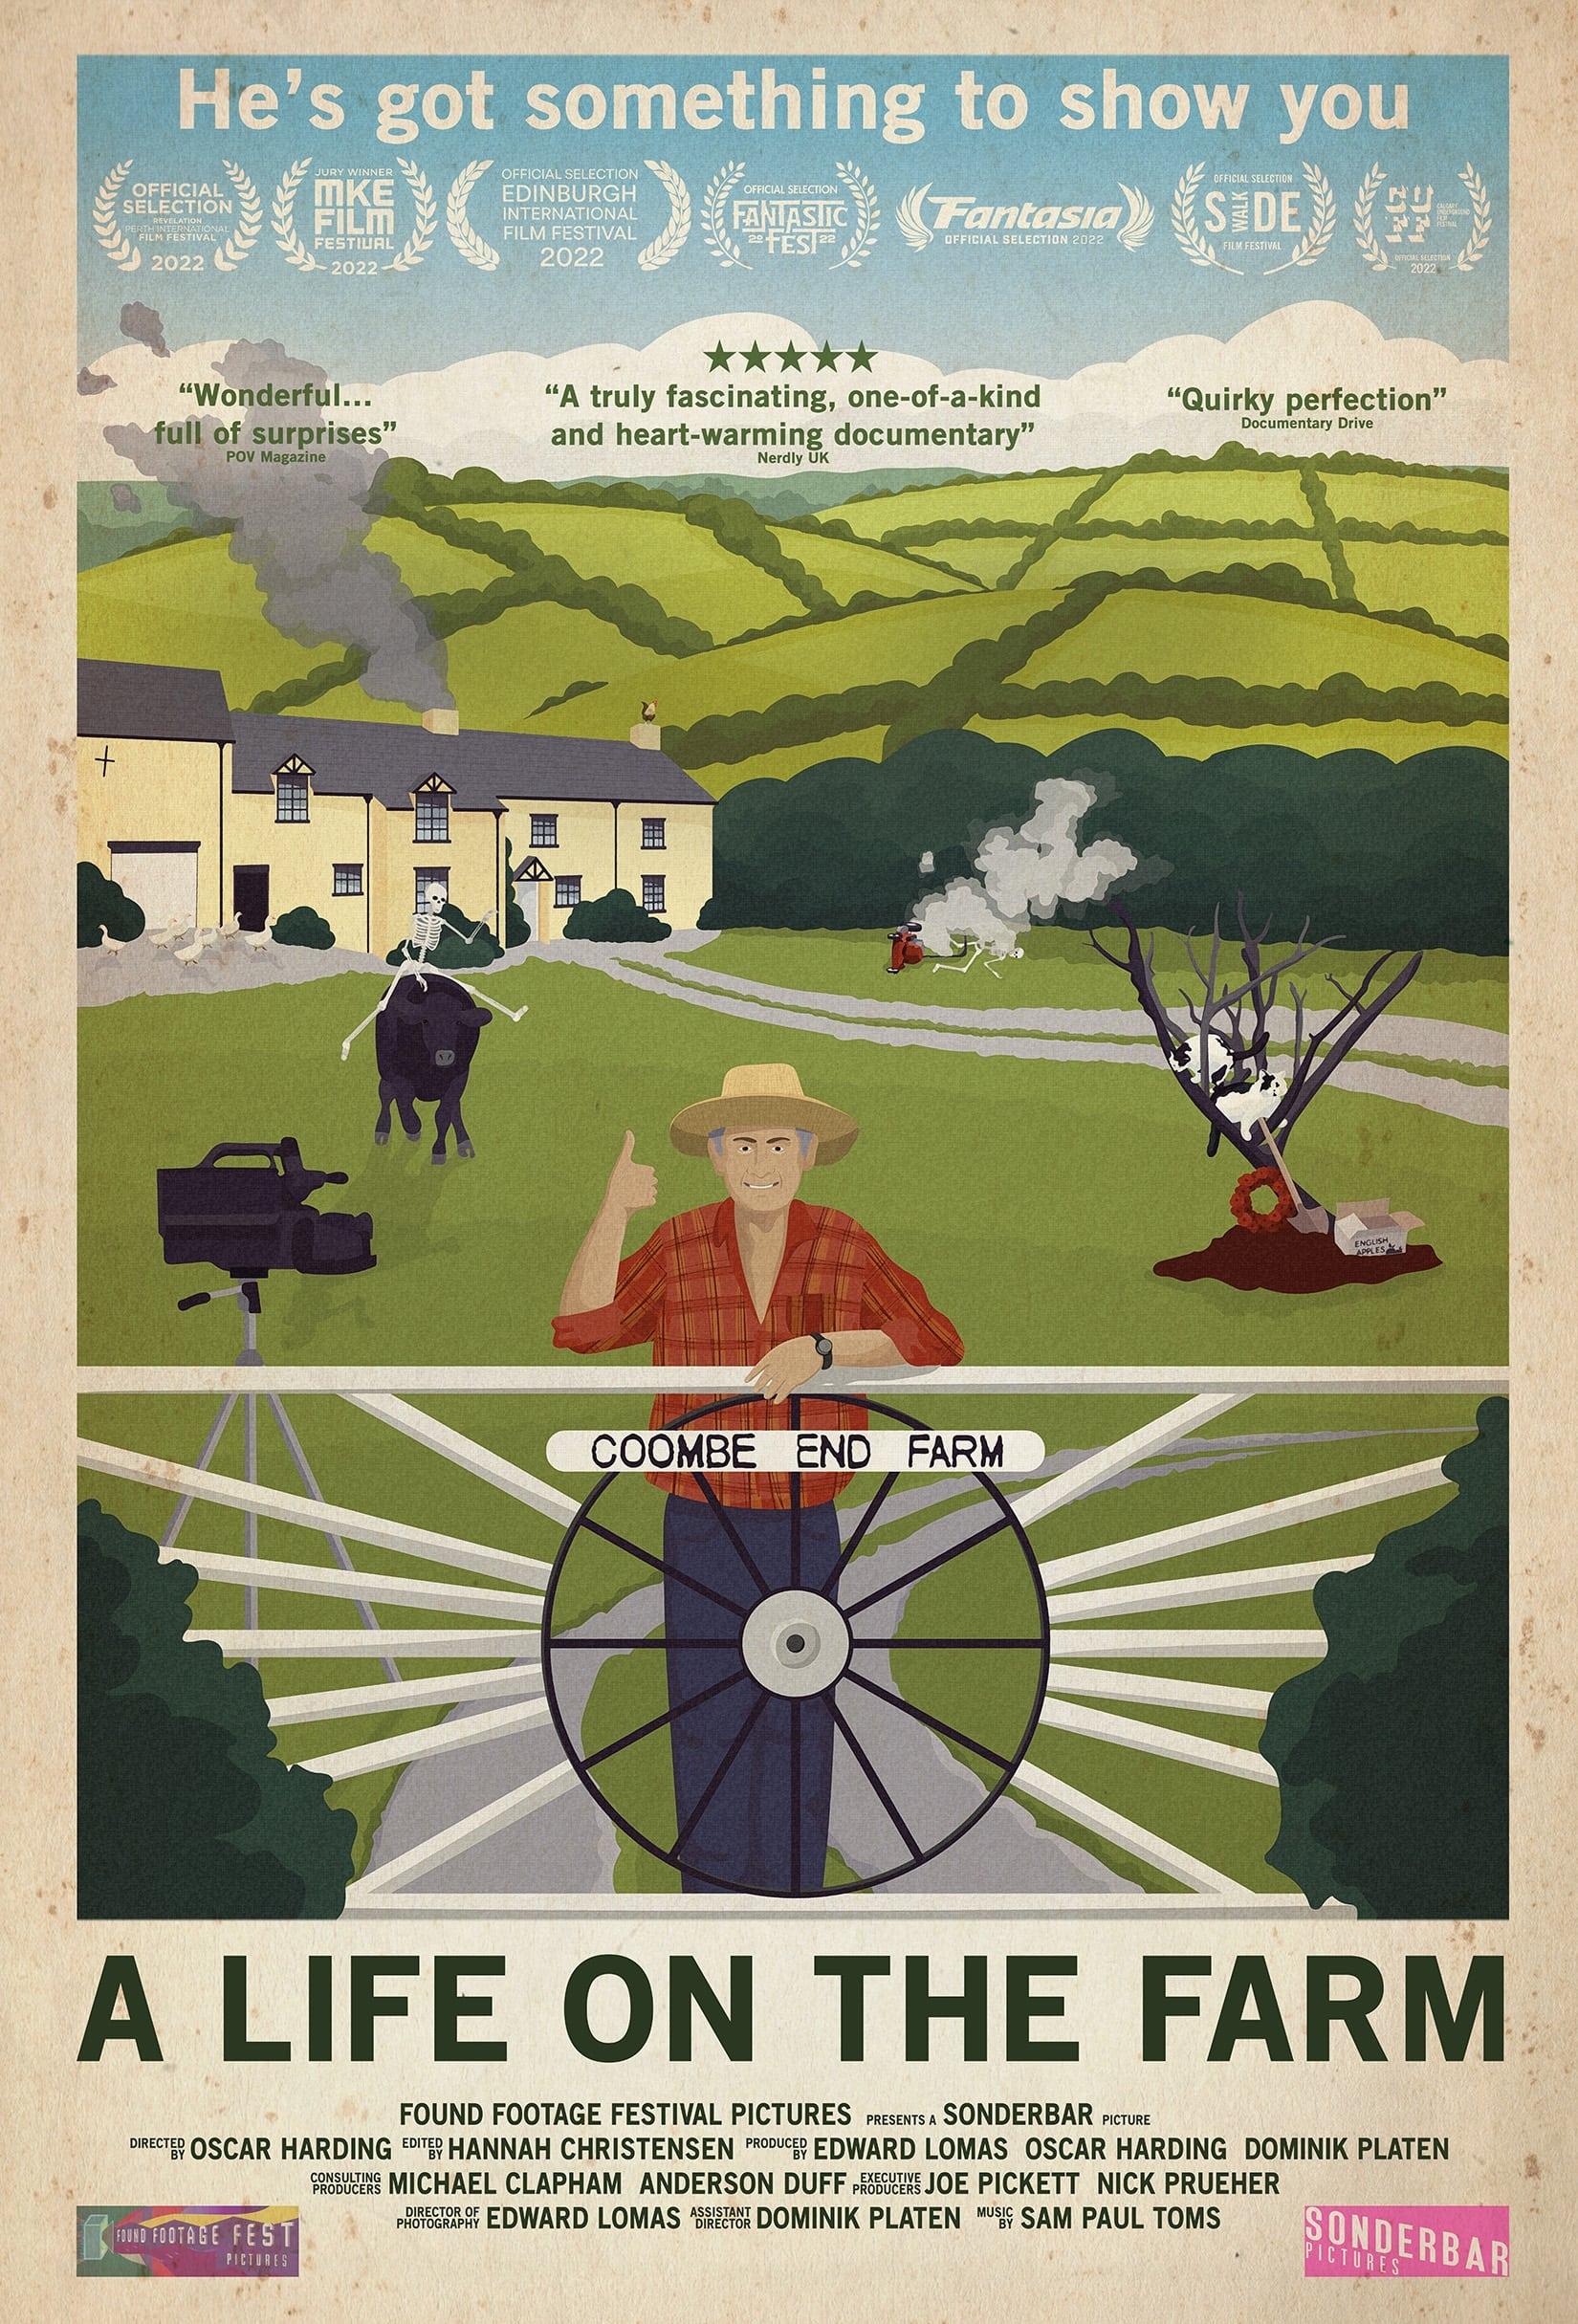 A Life on the Farm poster